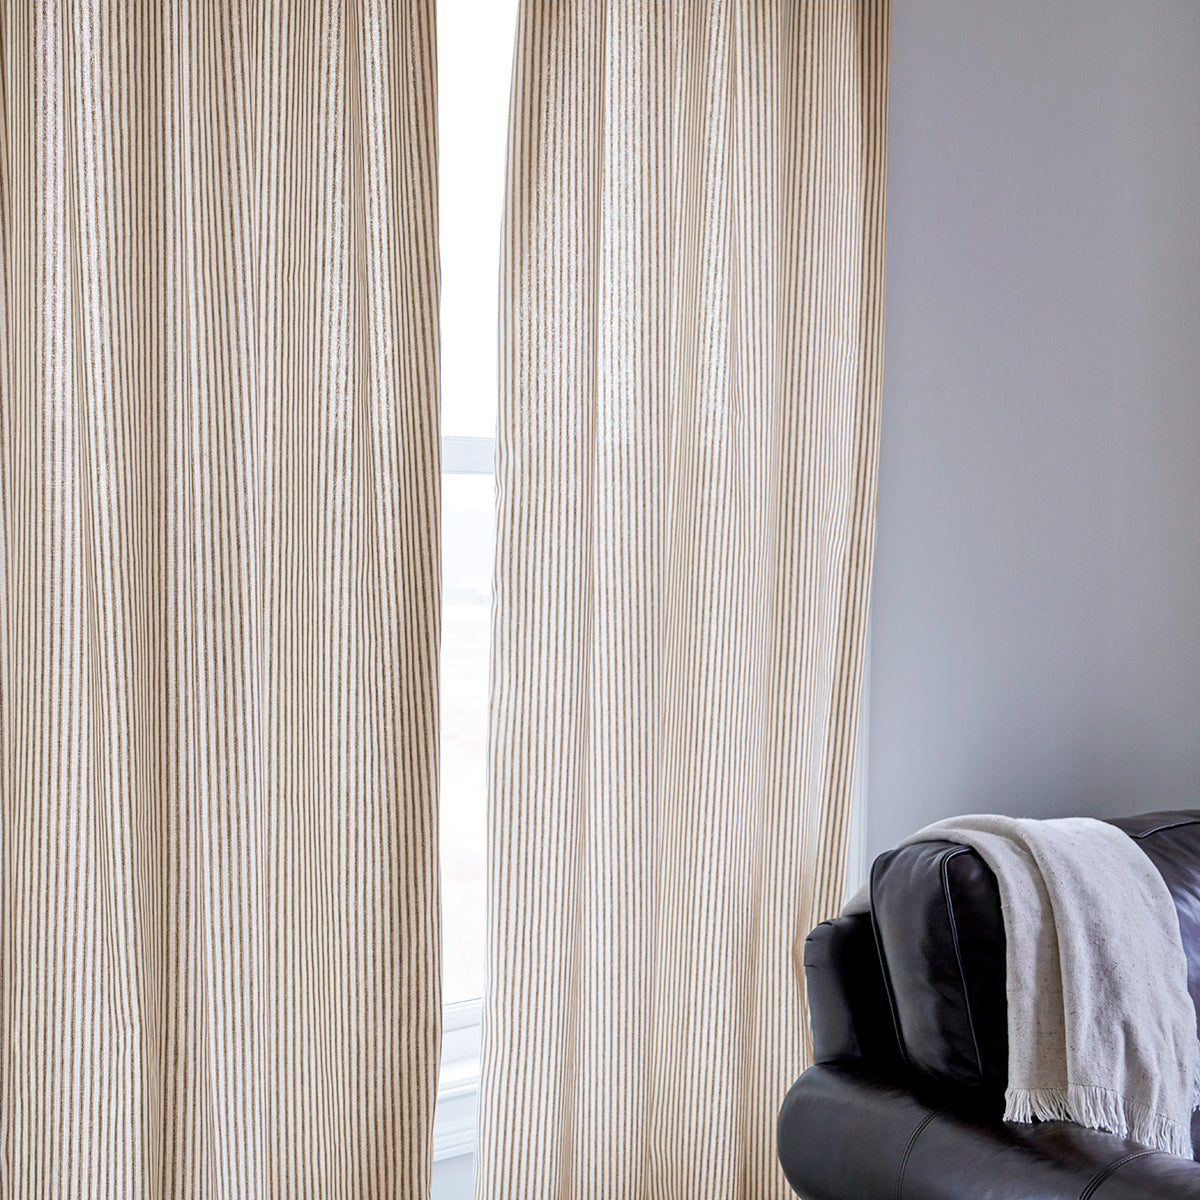 Brown Ticking Stripe Curtain Panels Shown In Room